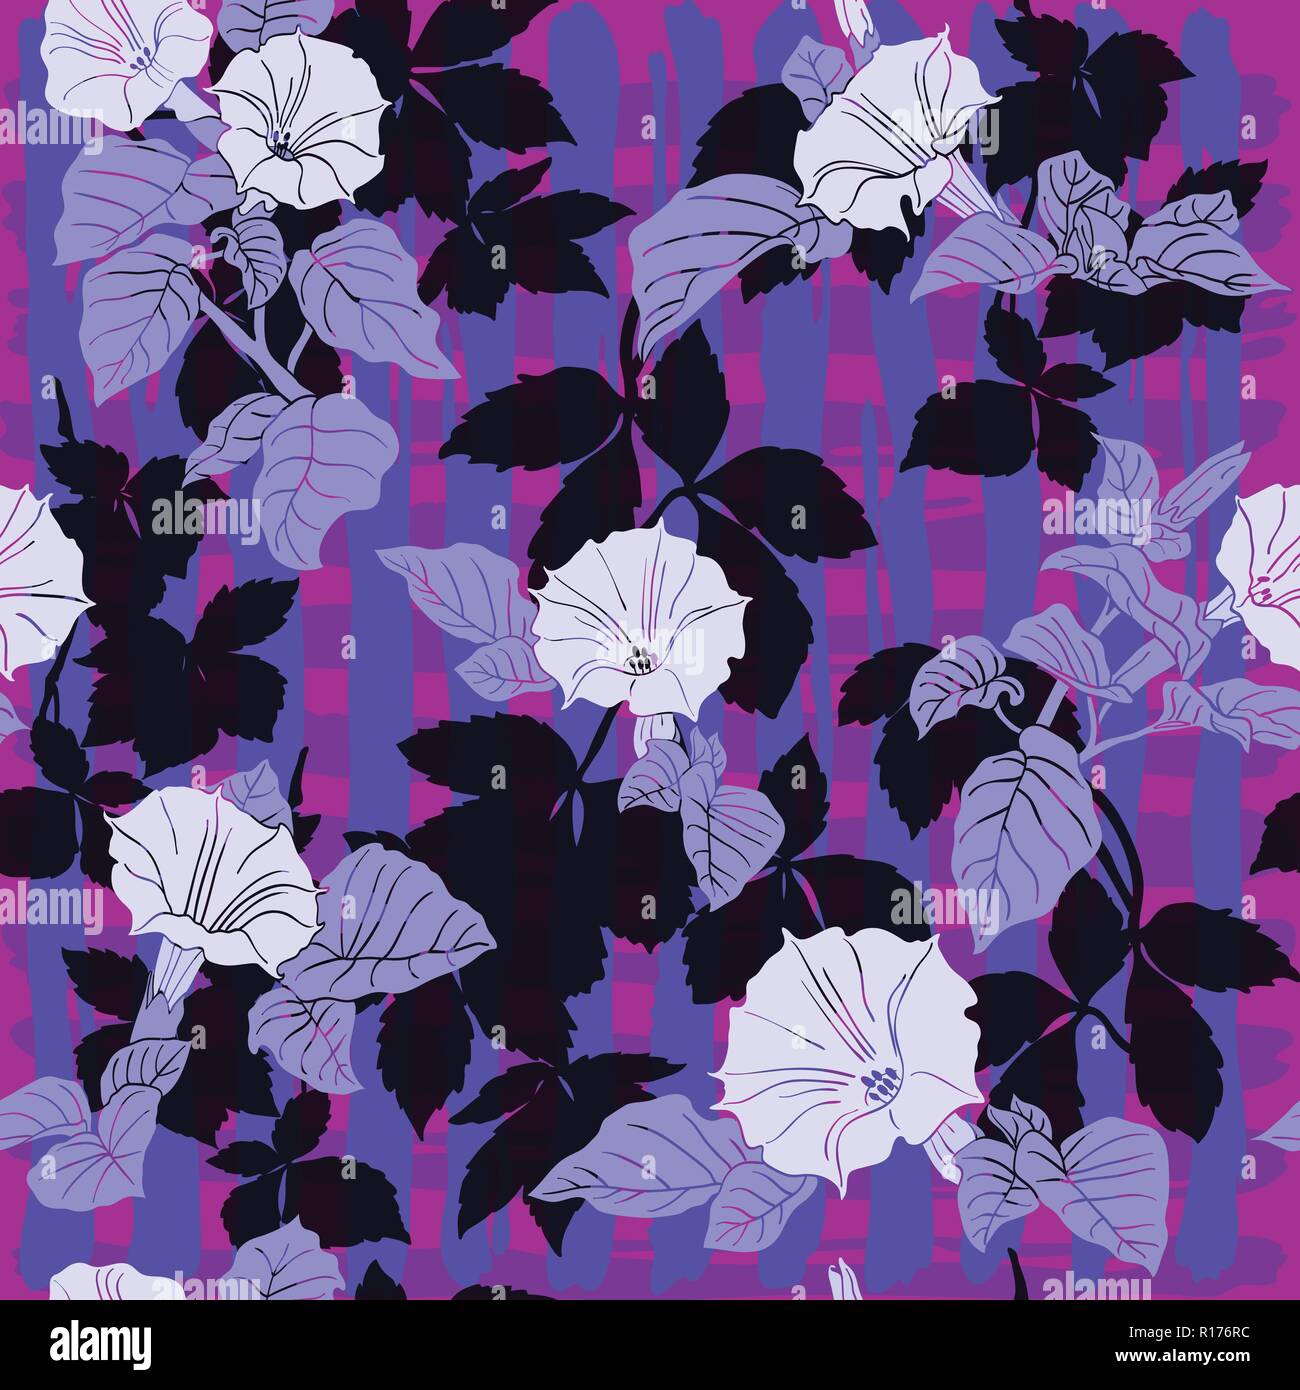 Lilac and purple flowers of dope floral pattern on the black background for bed linen, curtains, decorative pillows, other home textile and women's cl Stock Vector